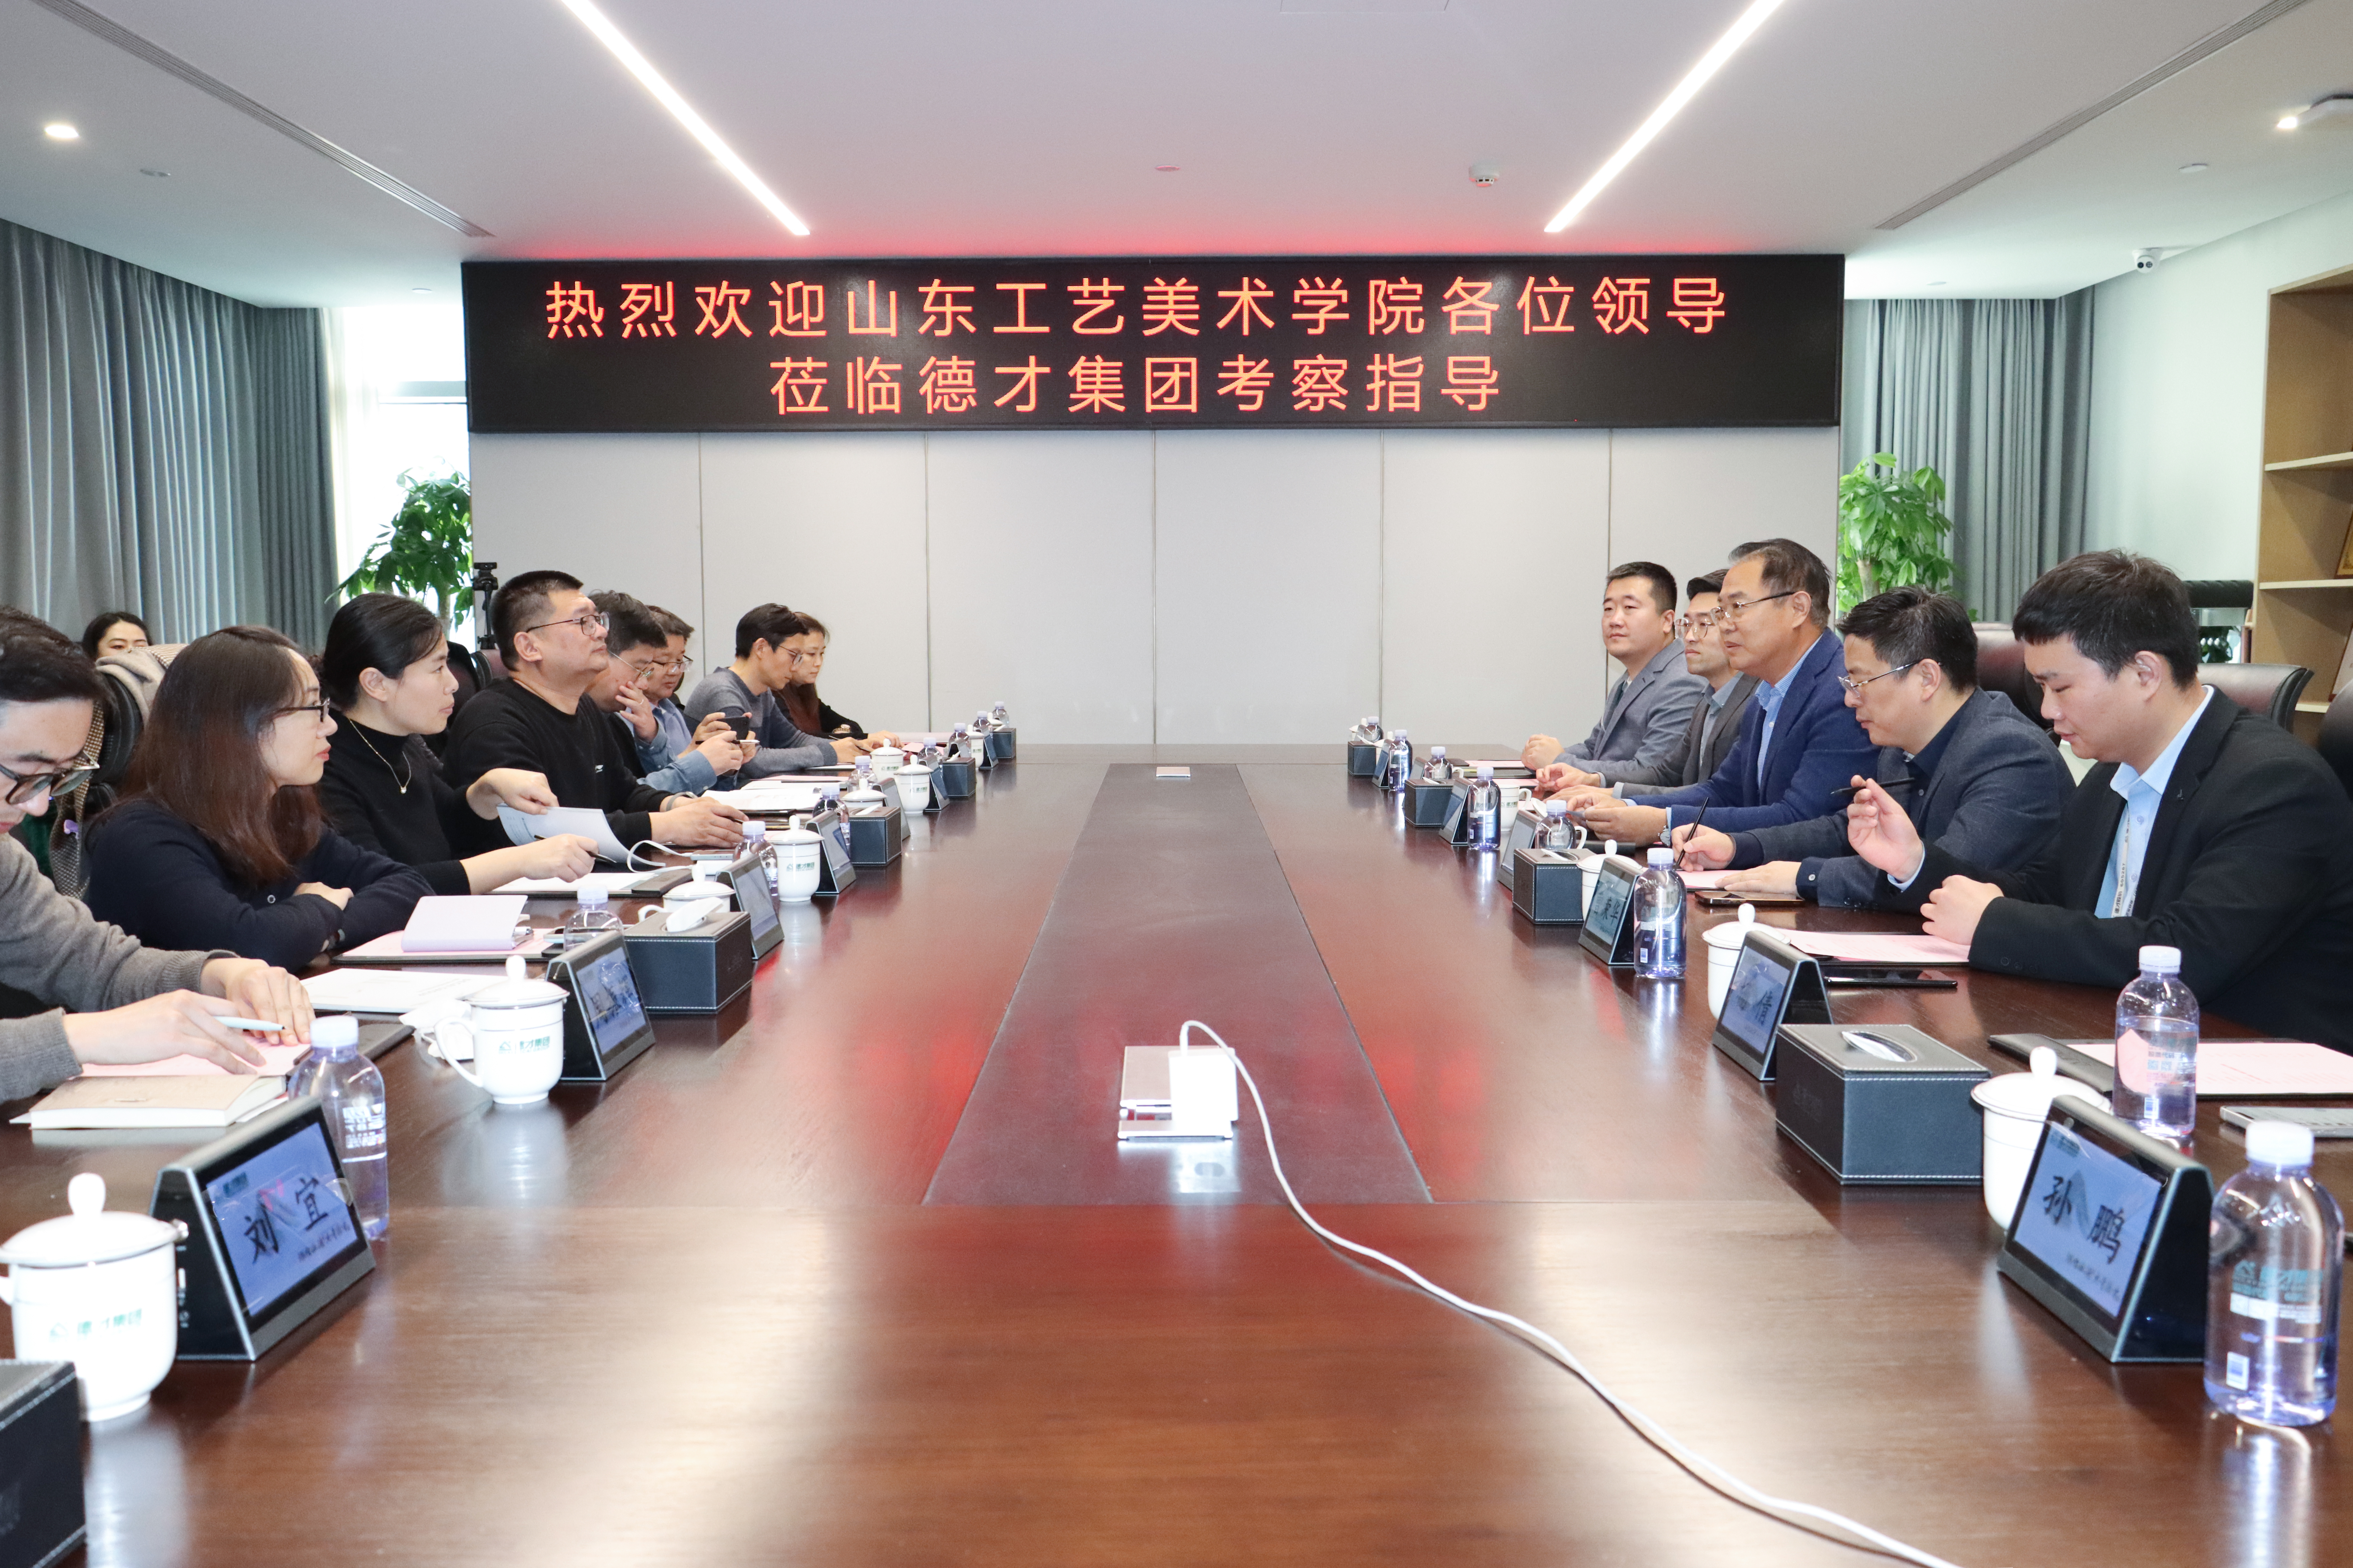 Teachers and students of Shandong Institute of Arts and Crafts visited Decai Shares